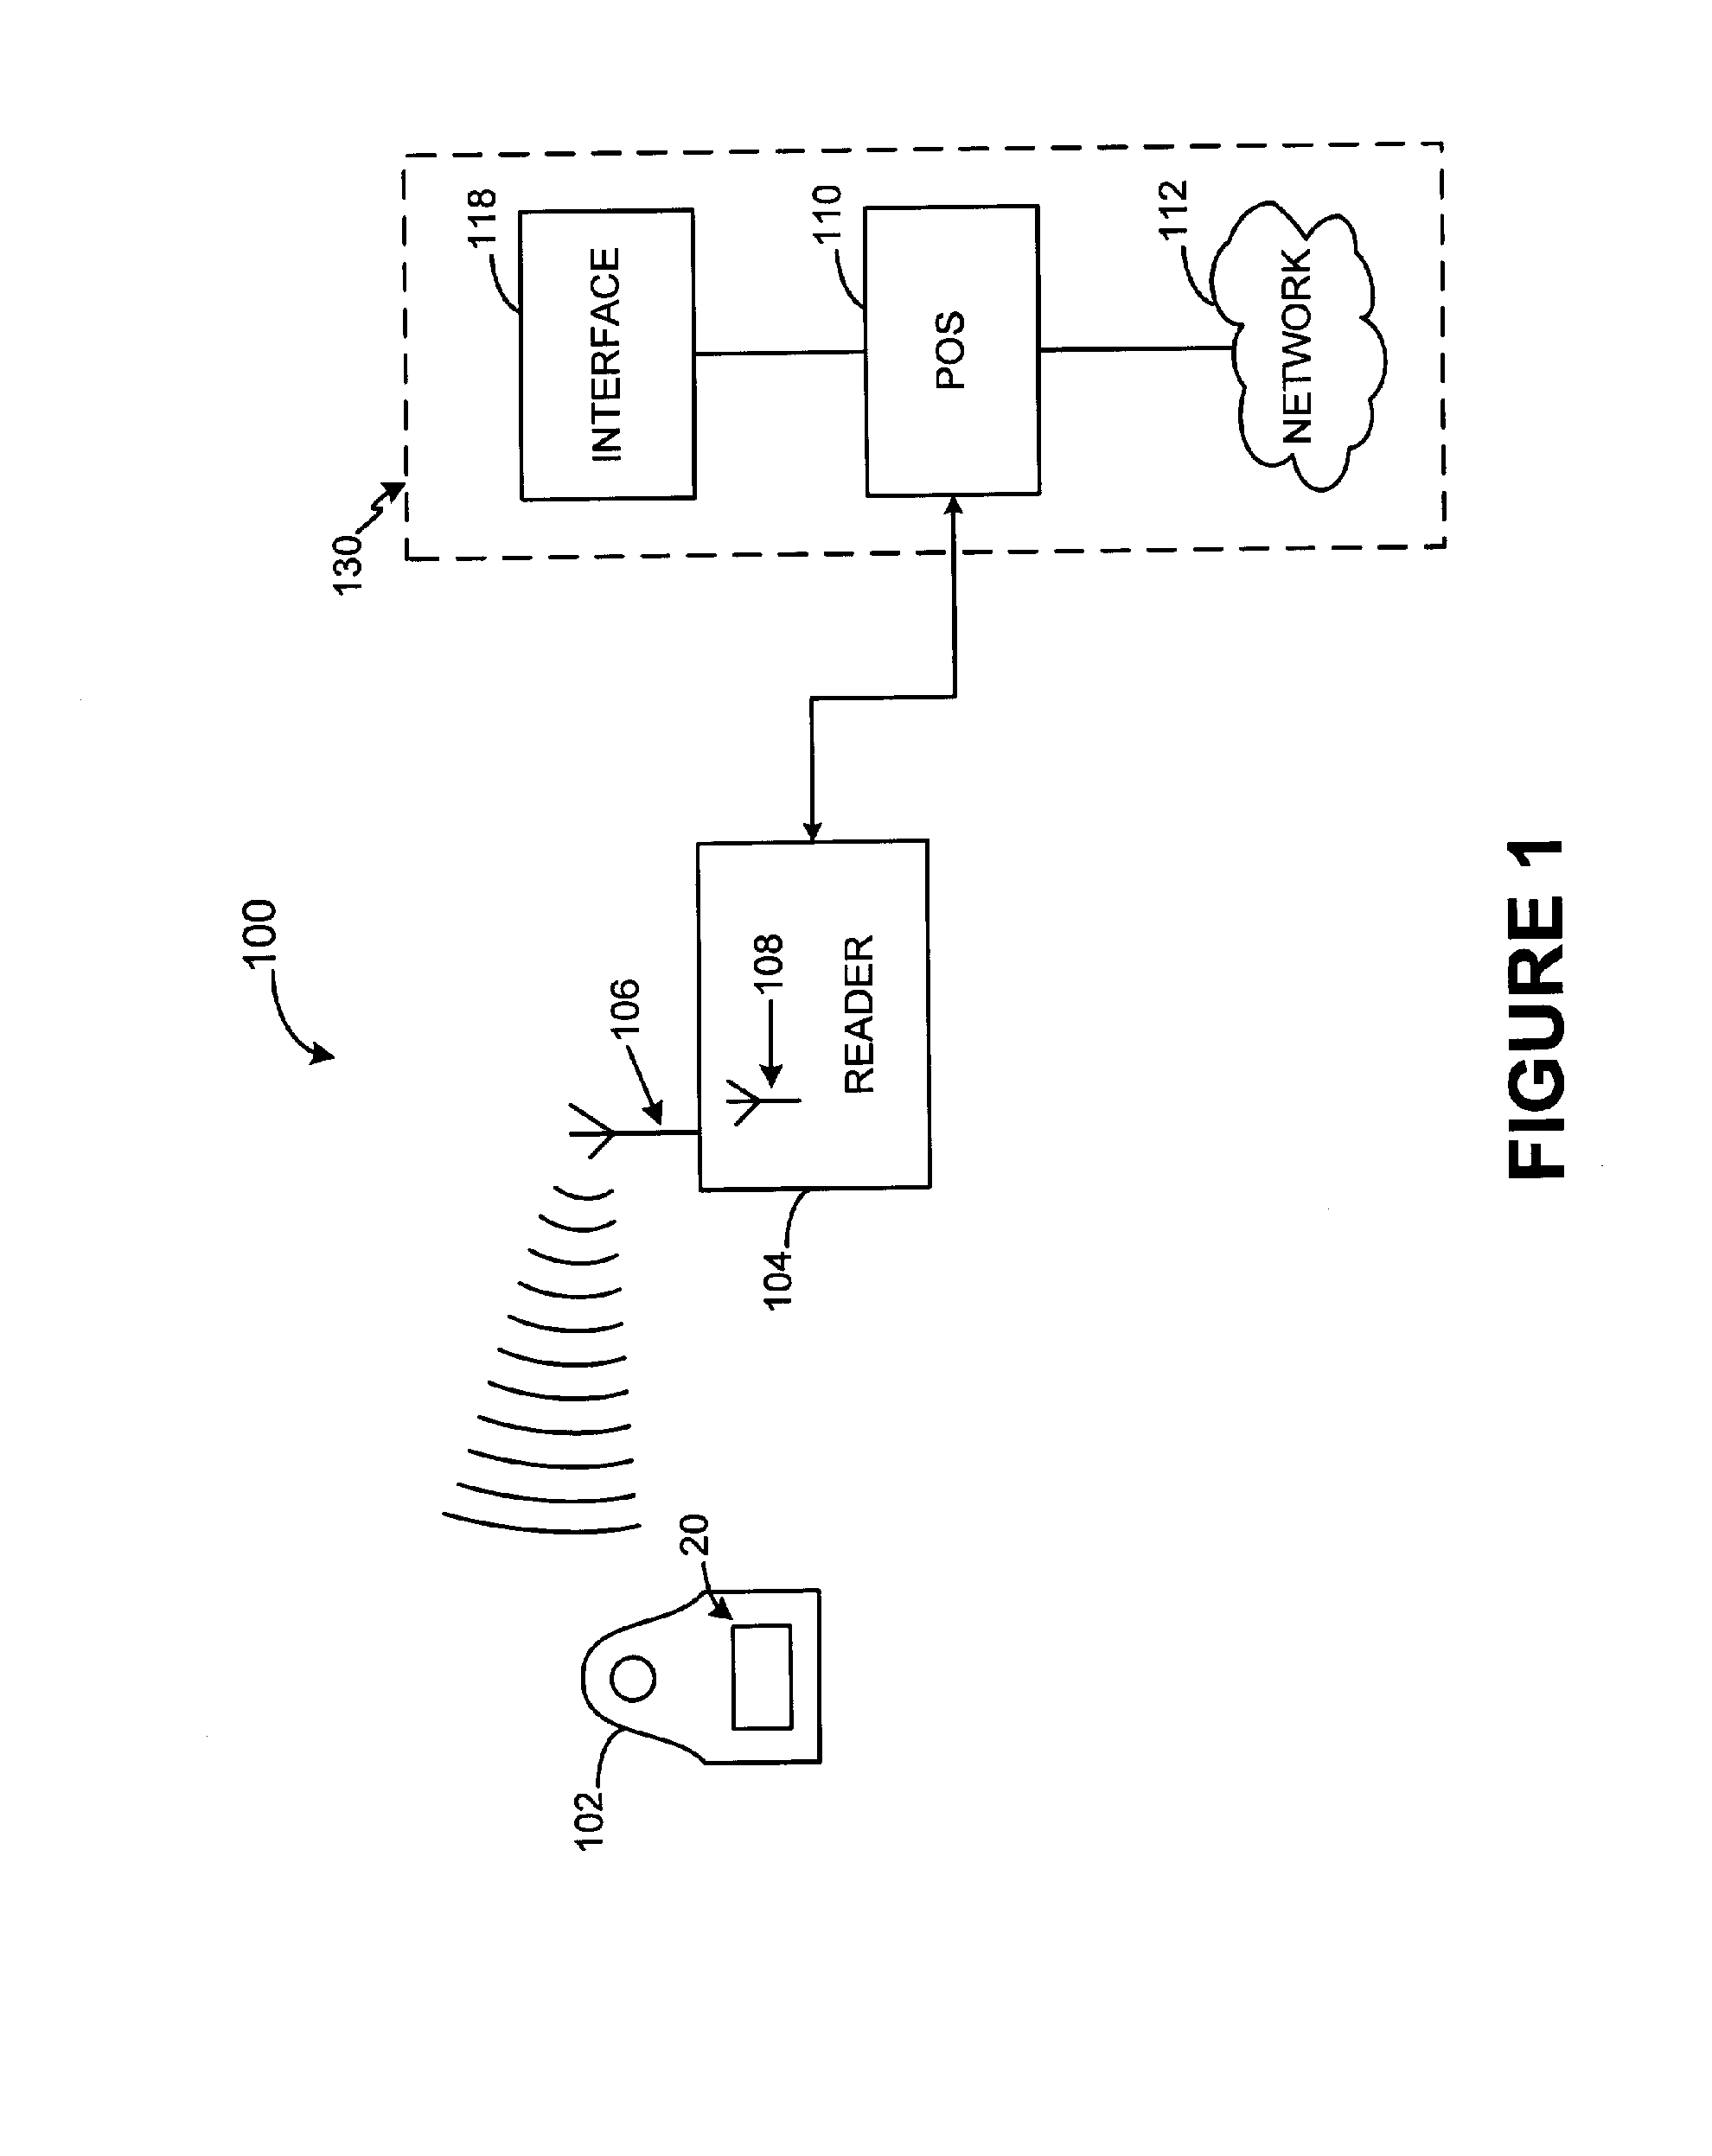 System and method for providing a RF payment solution to a mobile device